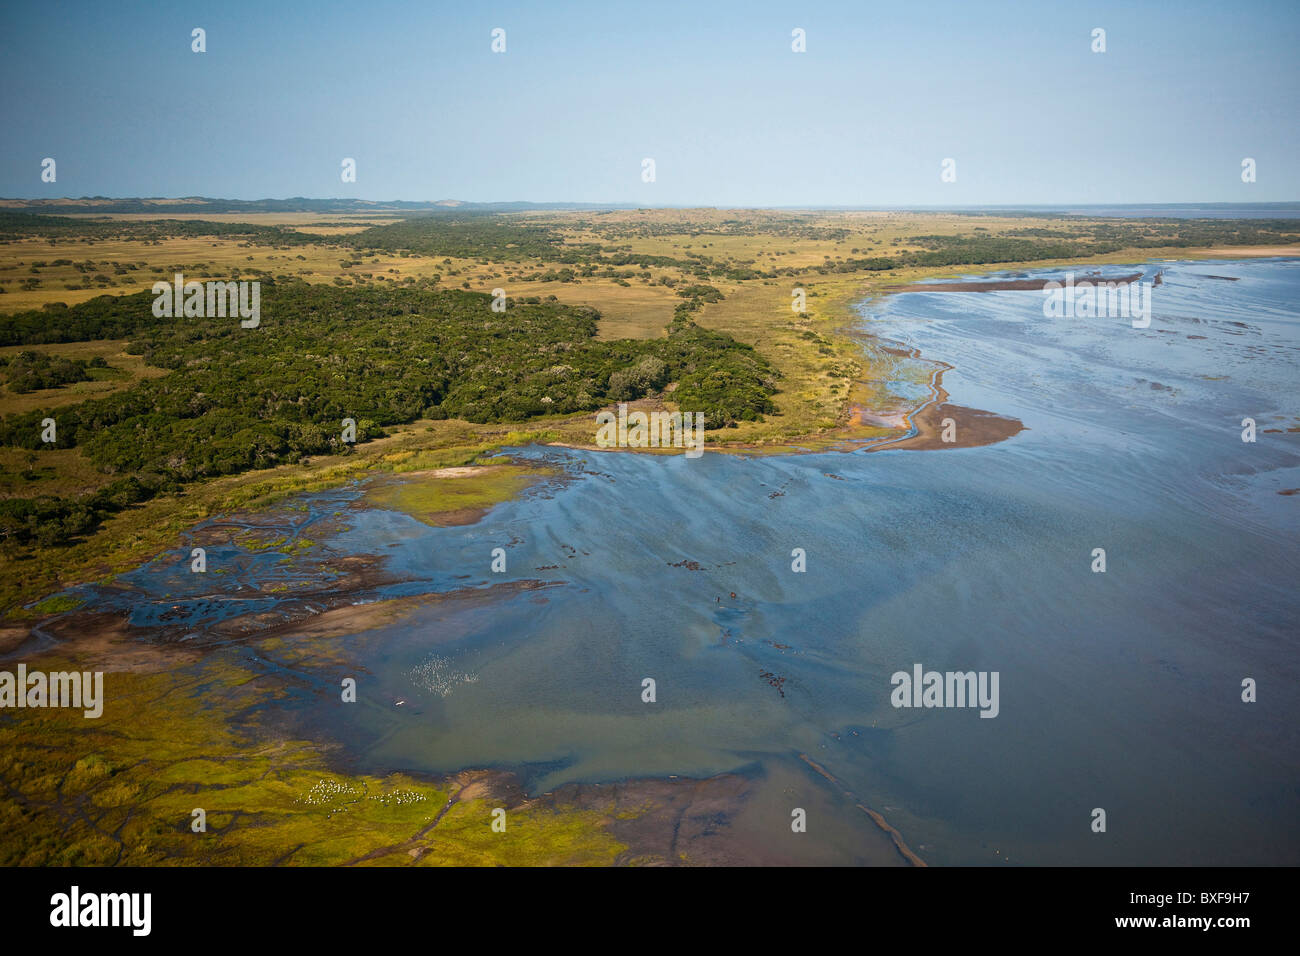 Aerial view of the iSimangaliso Wetland Park and the Eastern Shores. Lake St Lucia is in the foreground Stock Photo